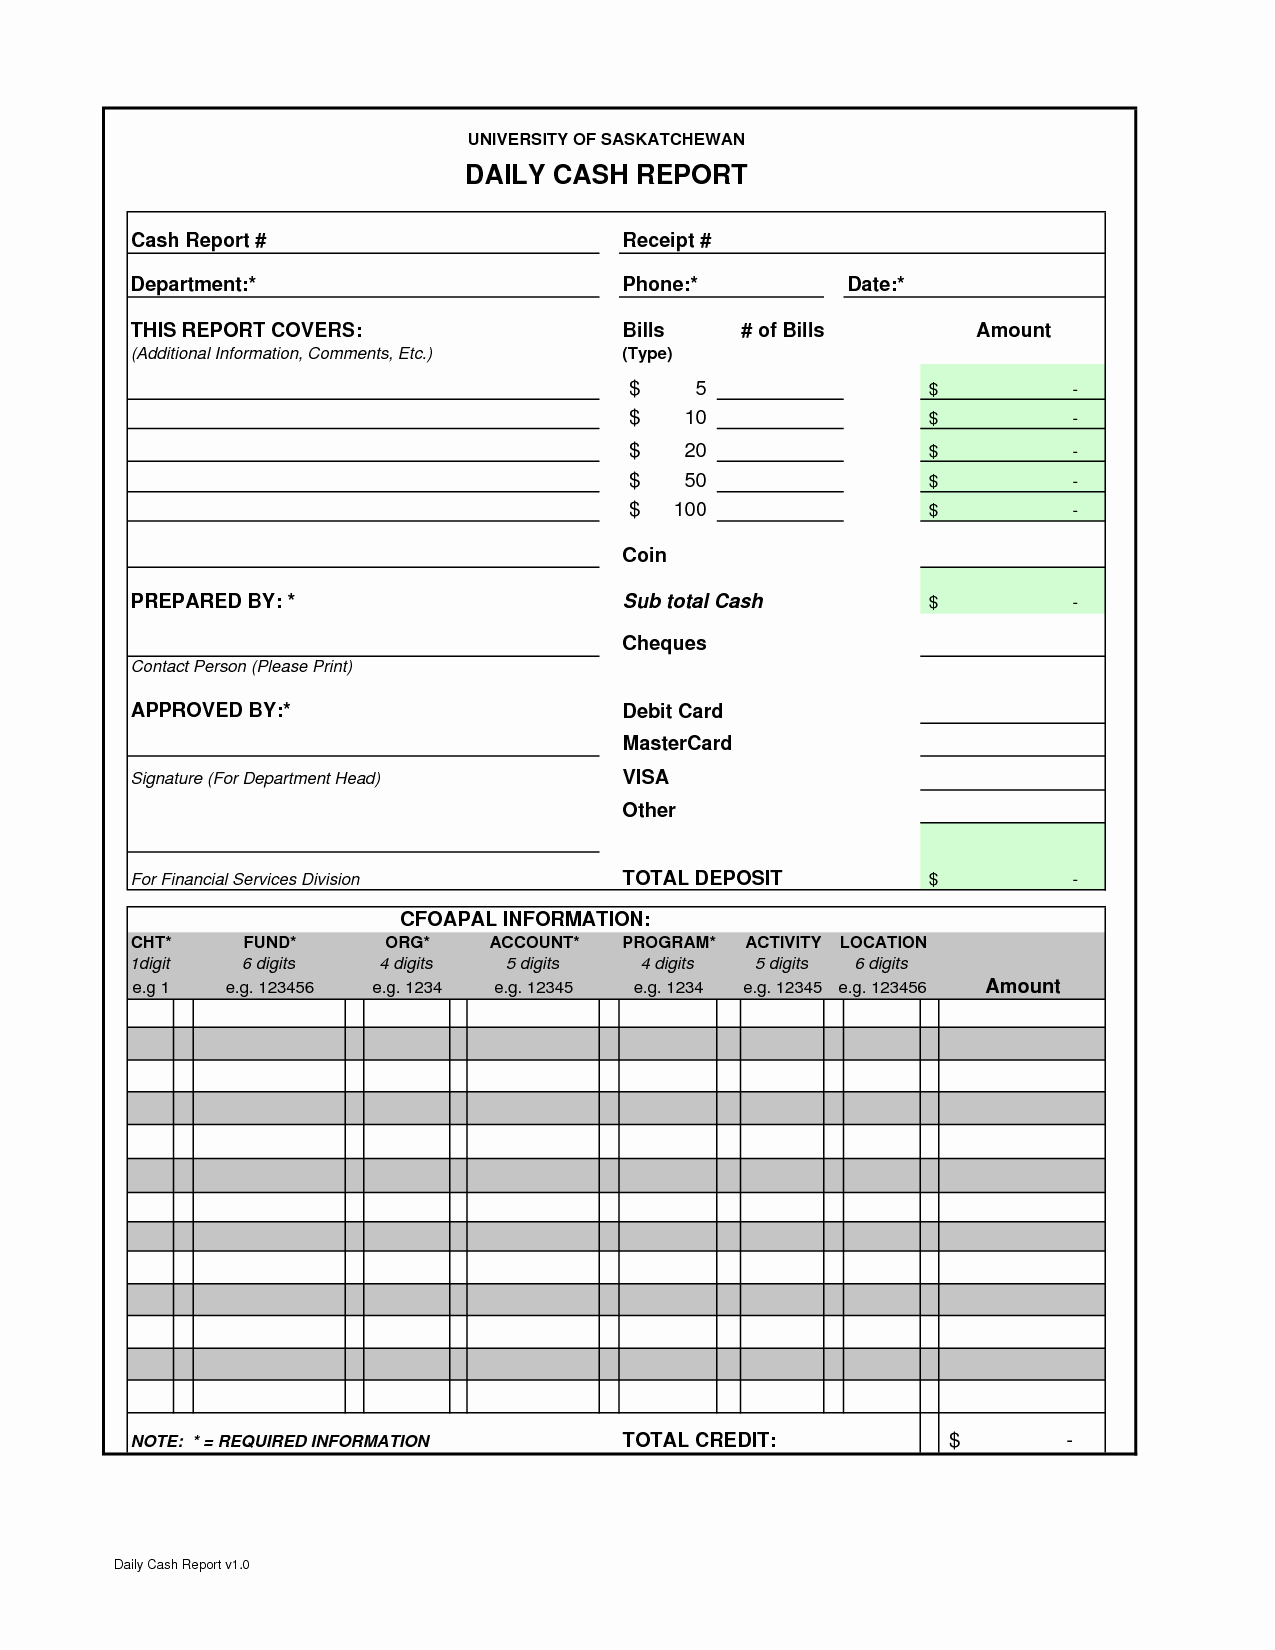 Daily Cash Report Template Excel New Daily Cash Register Balance Sheet Template